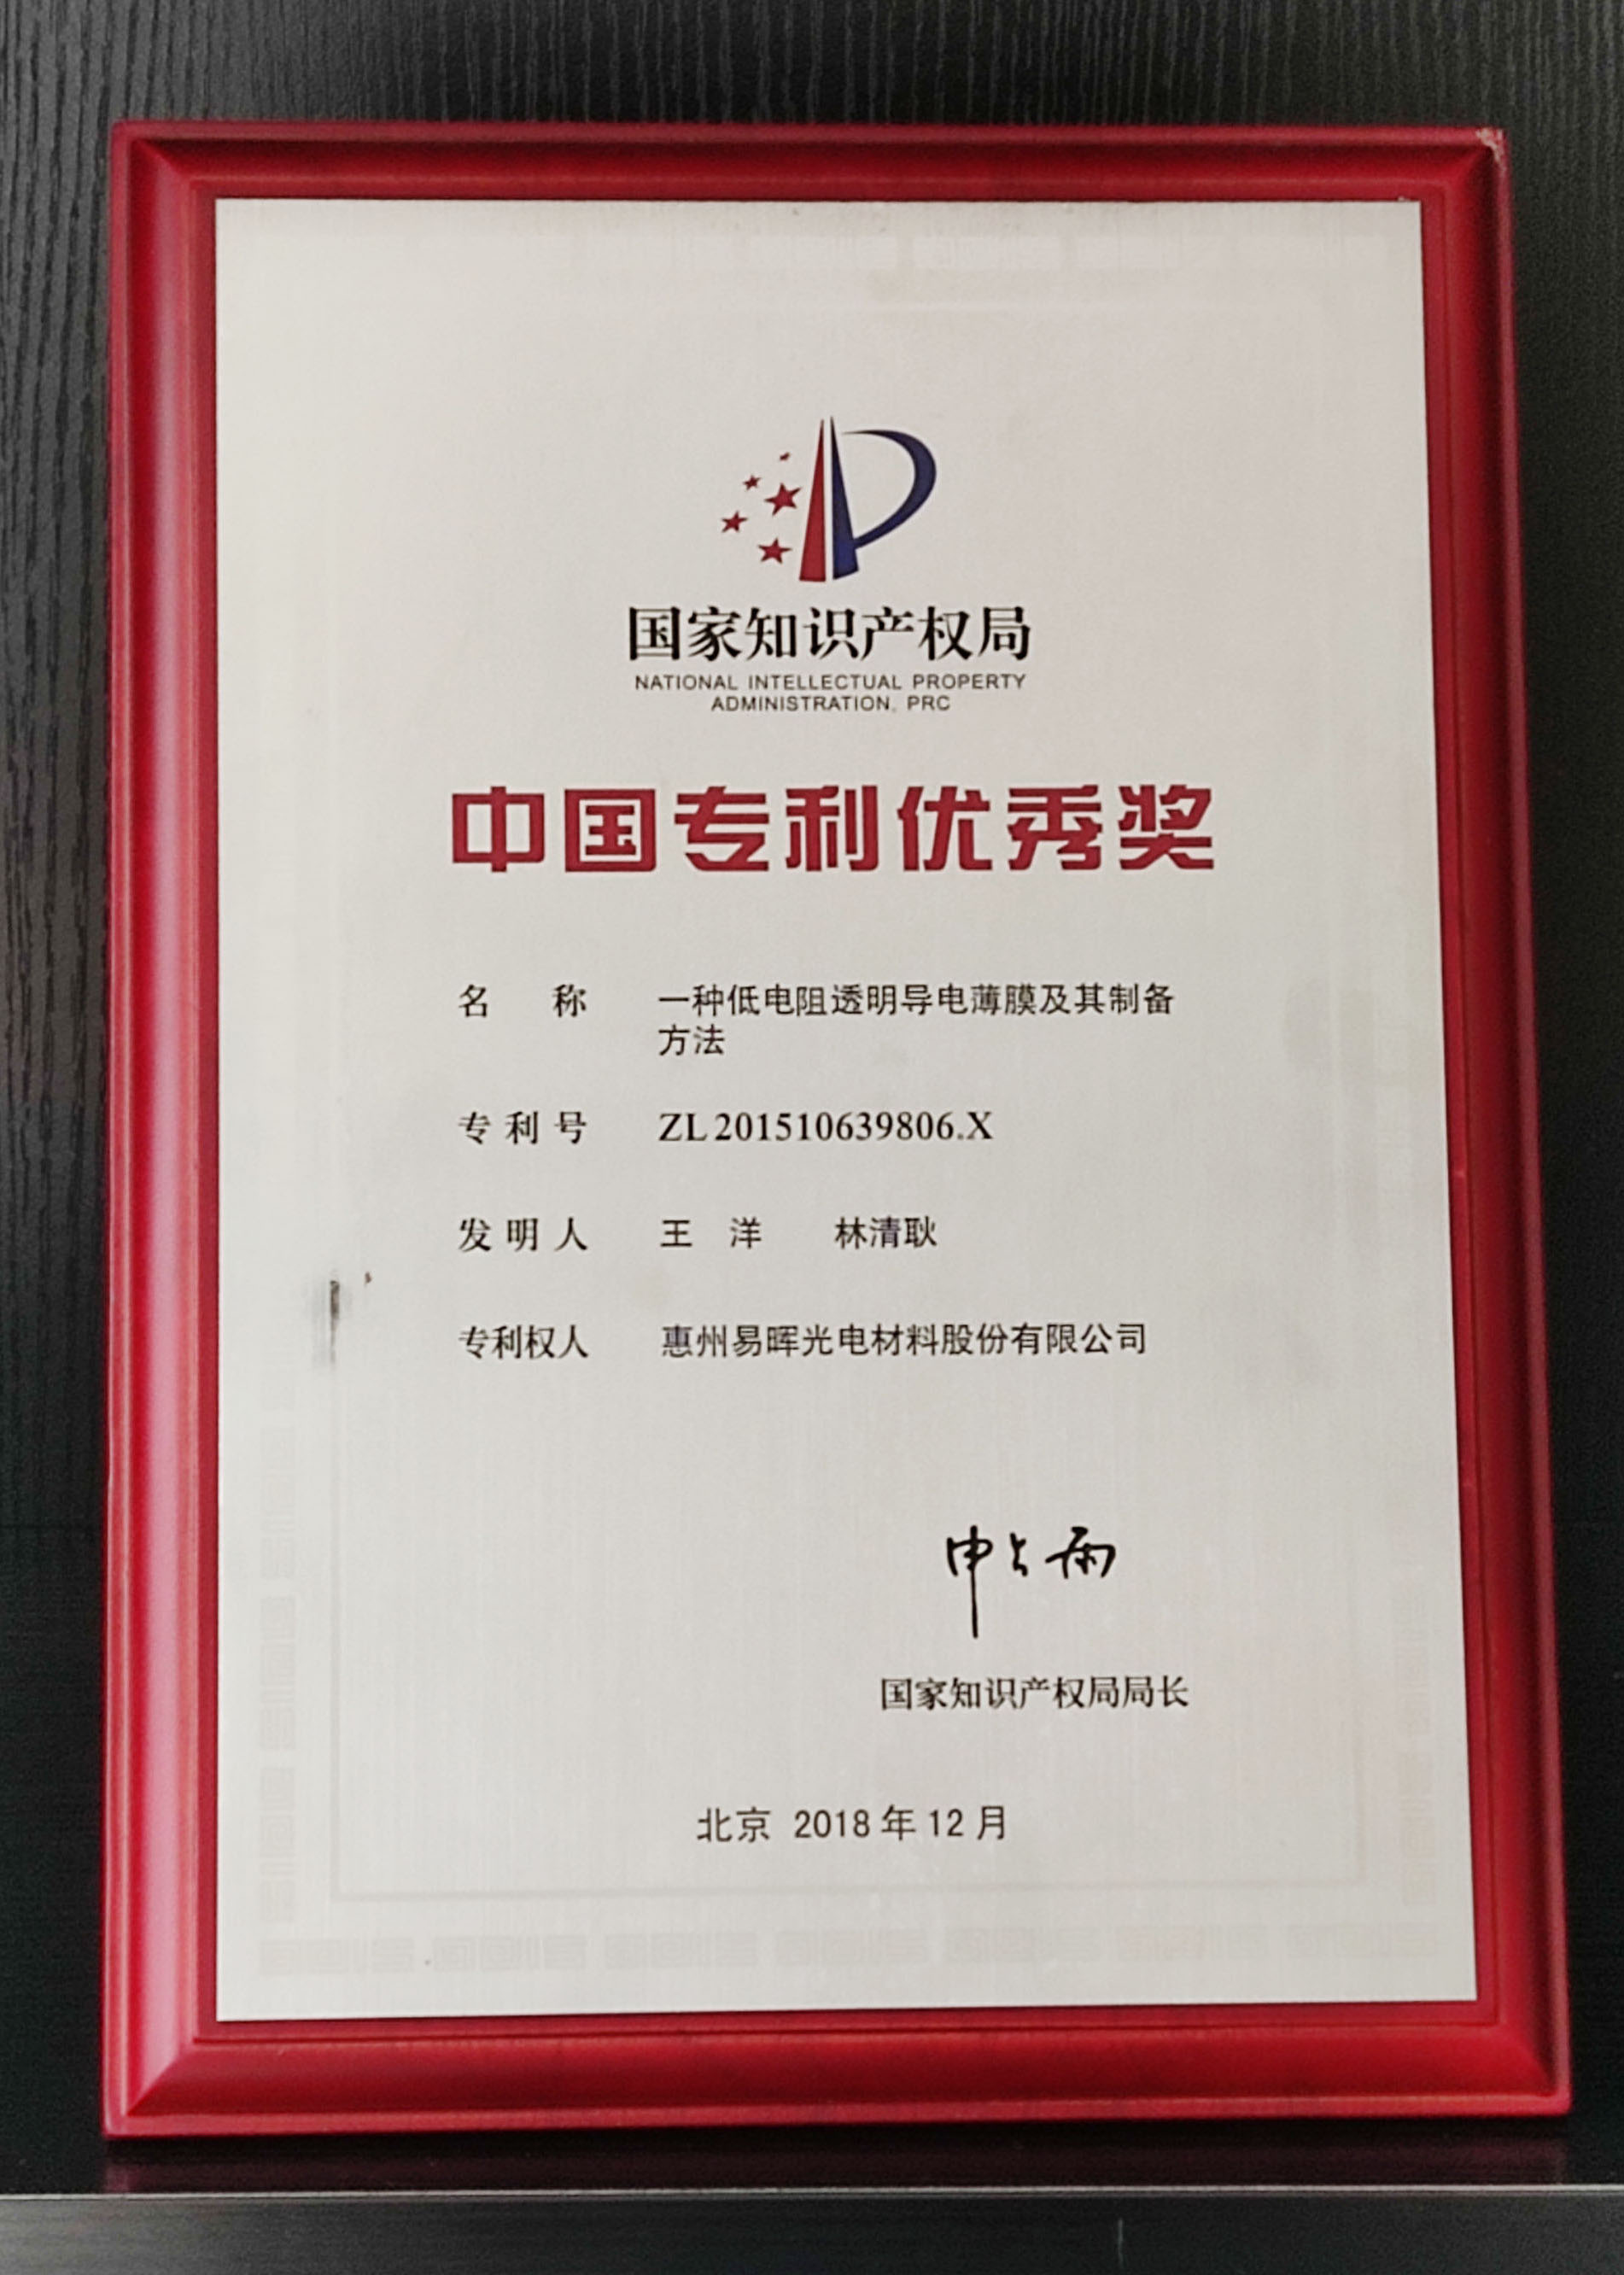 The 20th China Patent Excellence Award